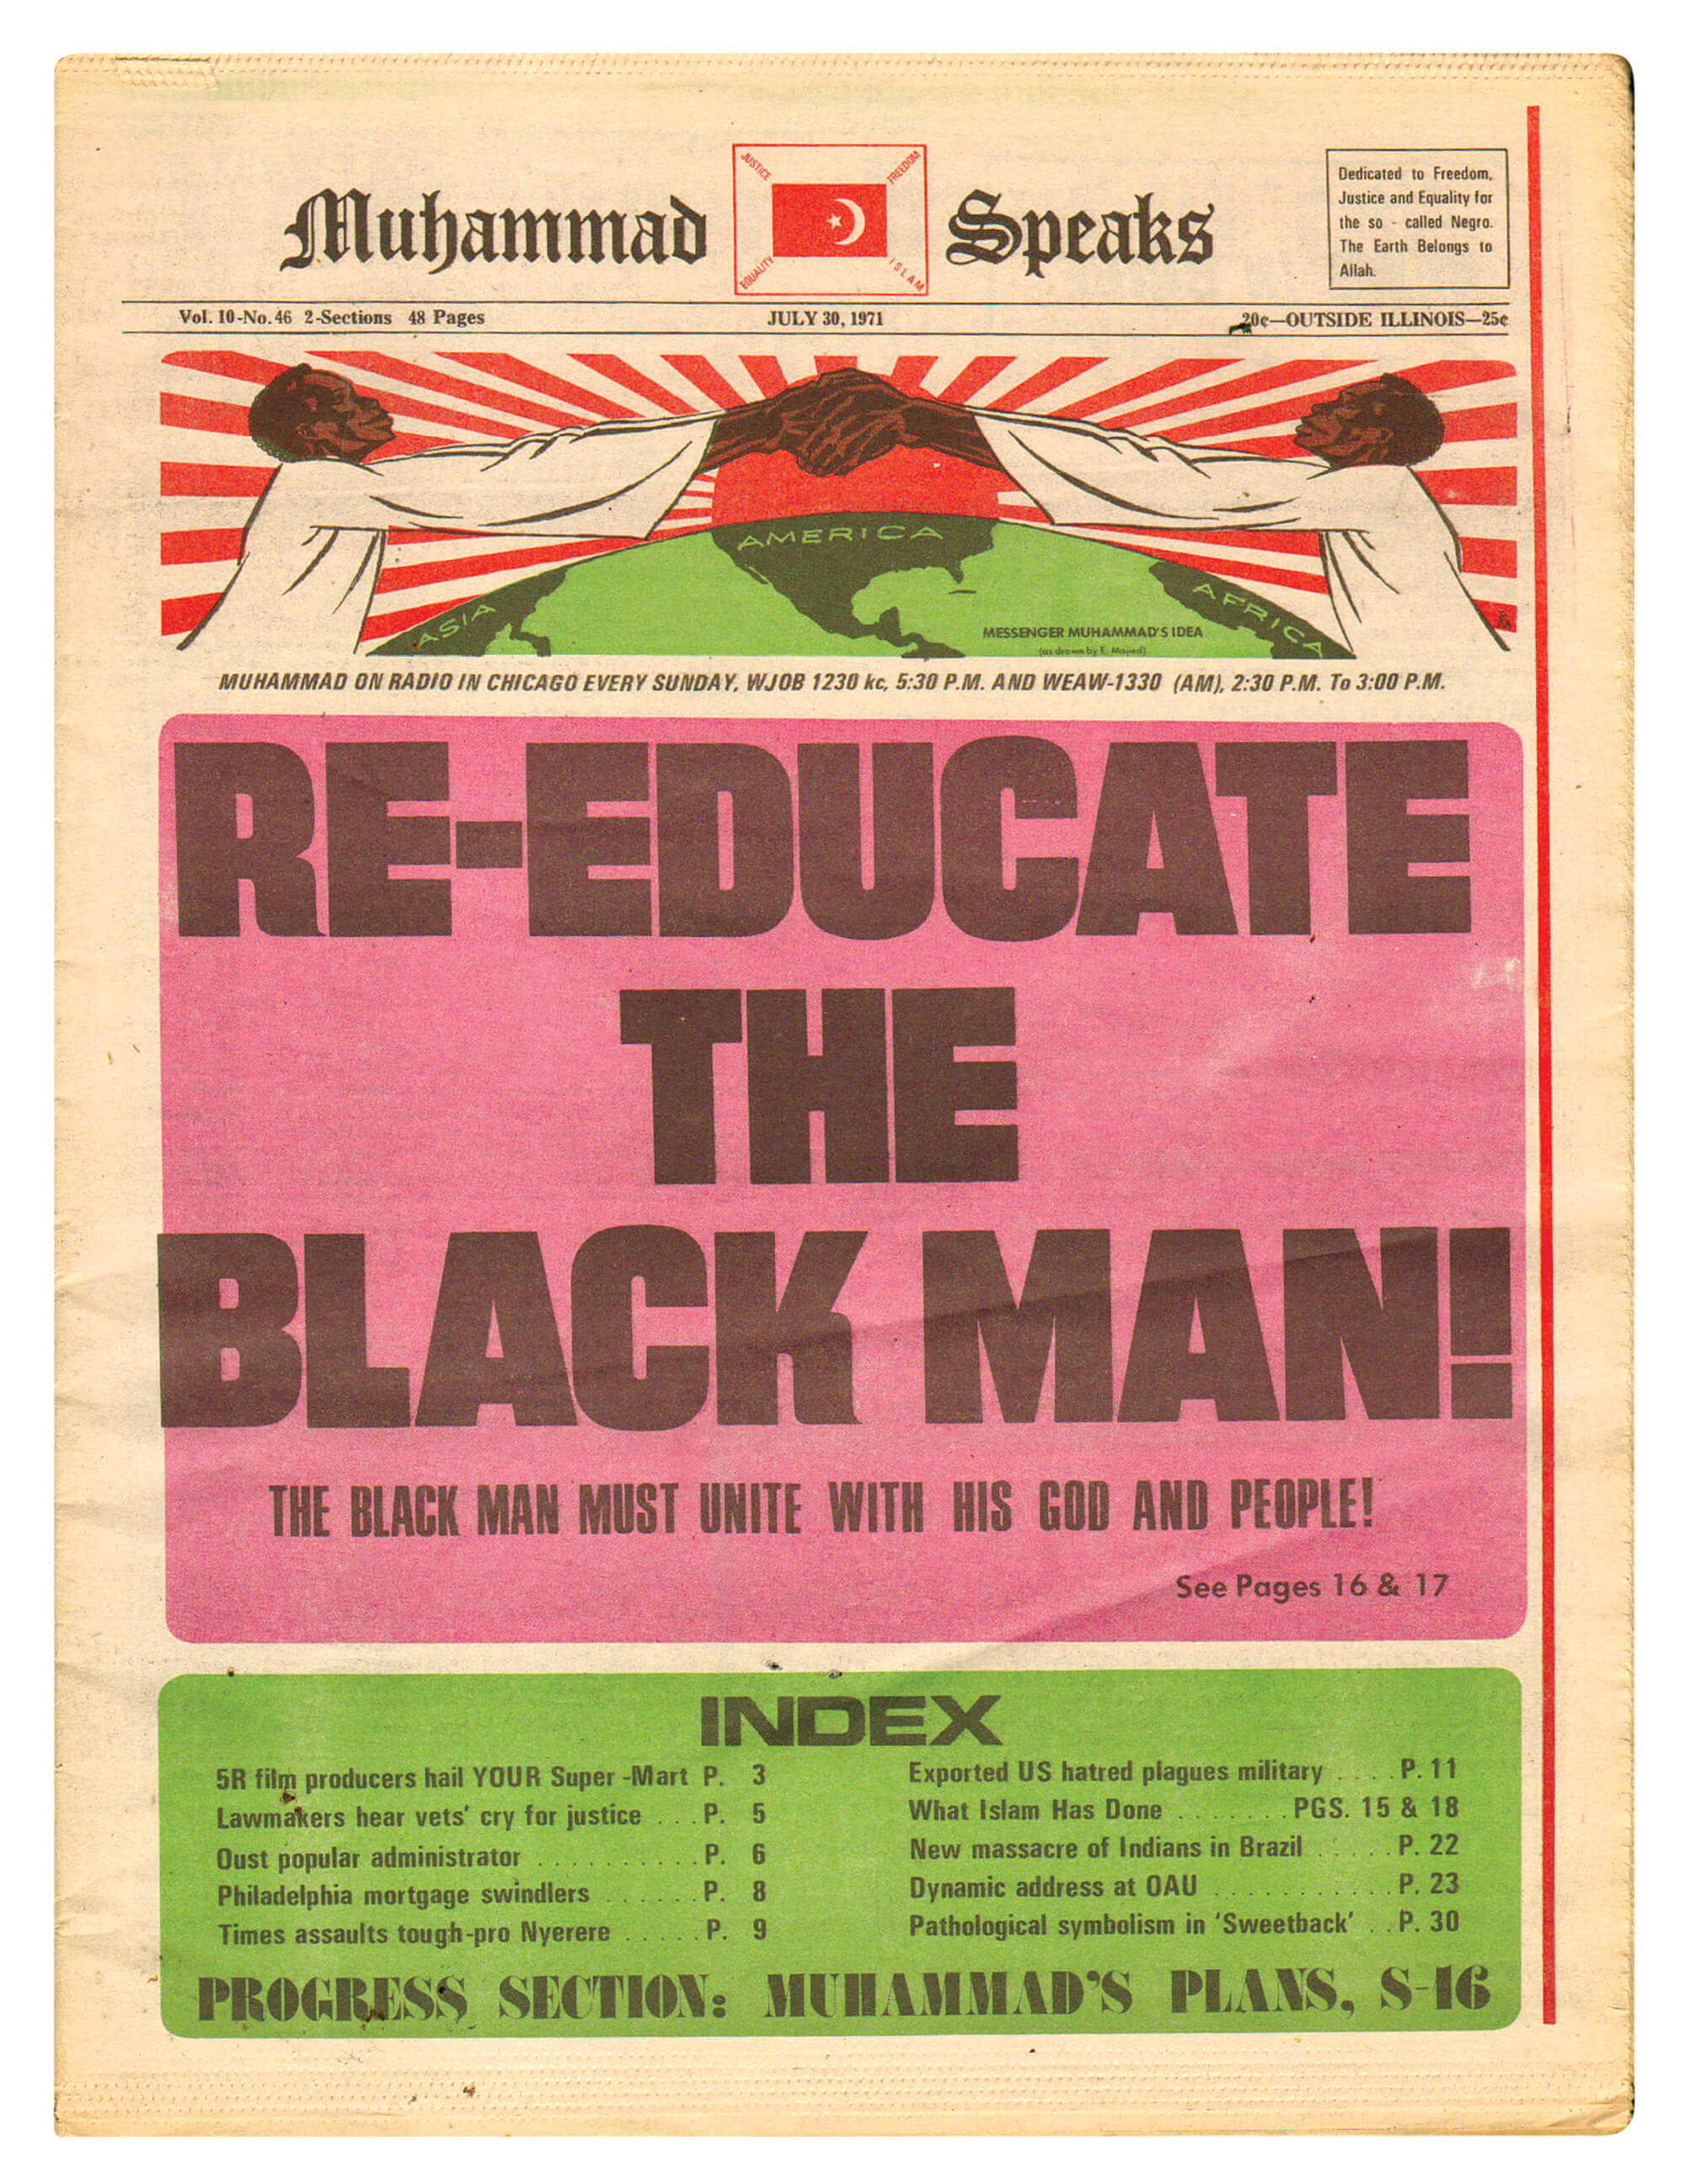 A photograph of the July thirtieth nineteen seventy one issue of “Muhammad Speaks,” a newspaper published in Chicago. The publication, originally published in New York, was started by Elijah Muhammad in nineteen sixty as “Mr. Muhammad Speaks,” eventually growing into the most widely circulated African American–owned newspaper in American history before being reconceived and renamed in nineteen seventy five following Muhammad’s death.